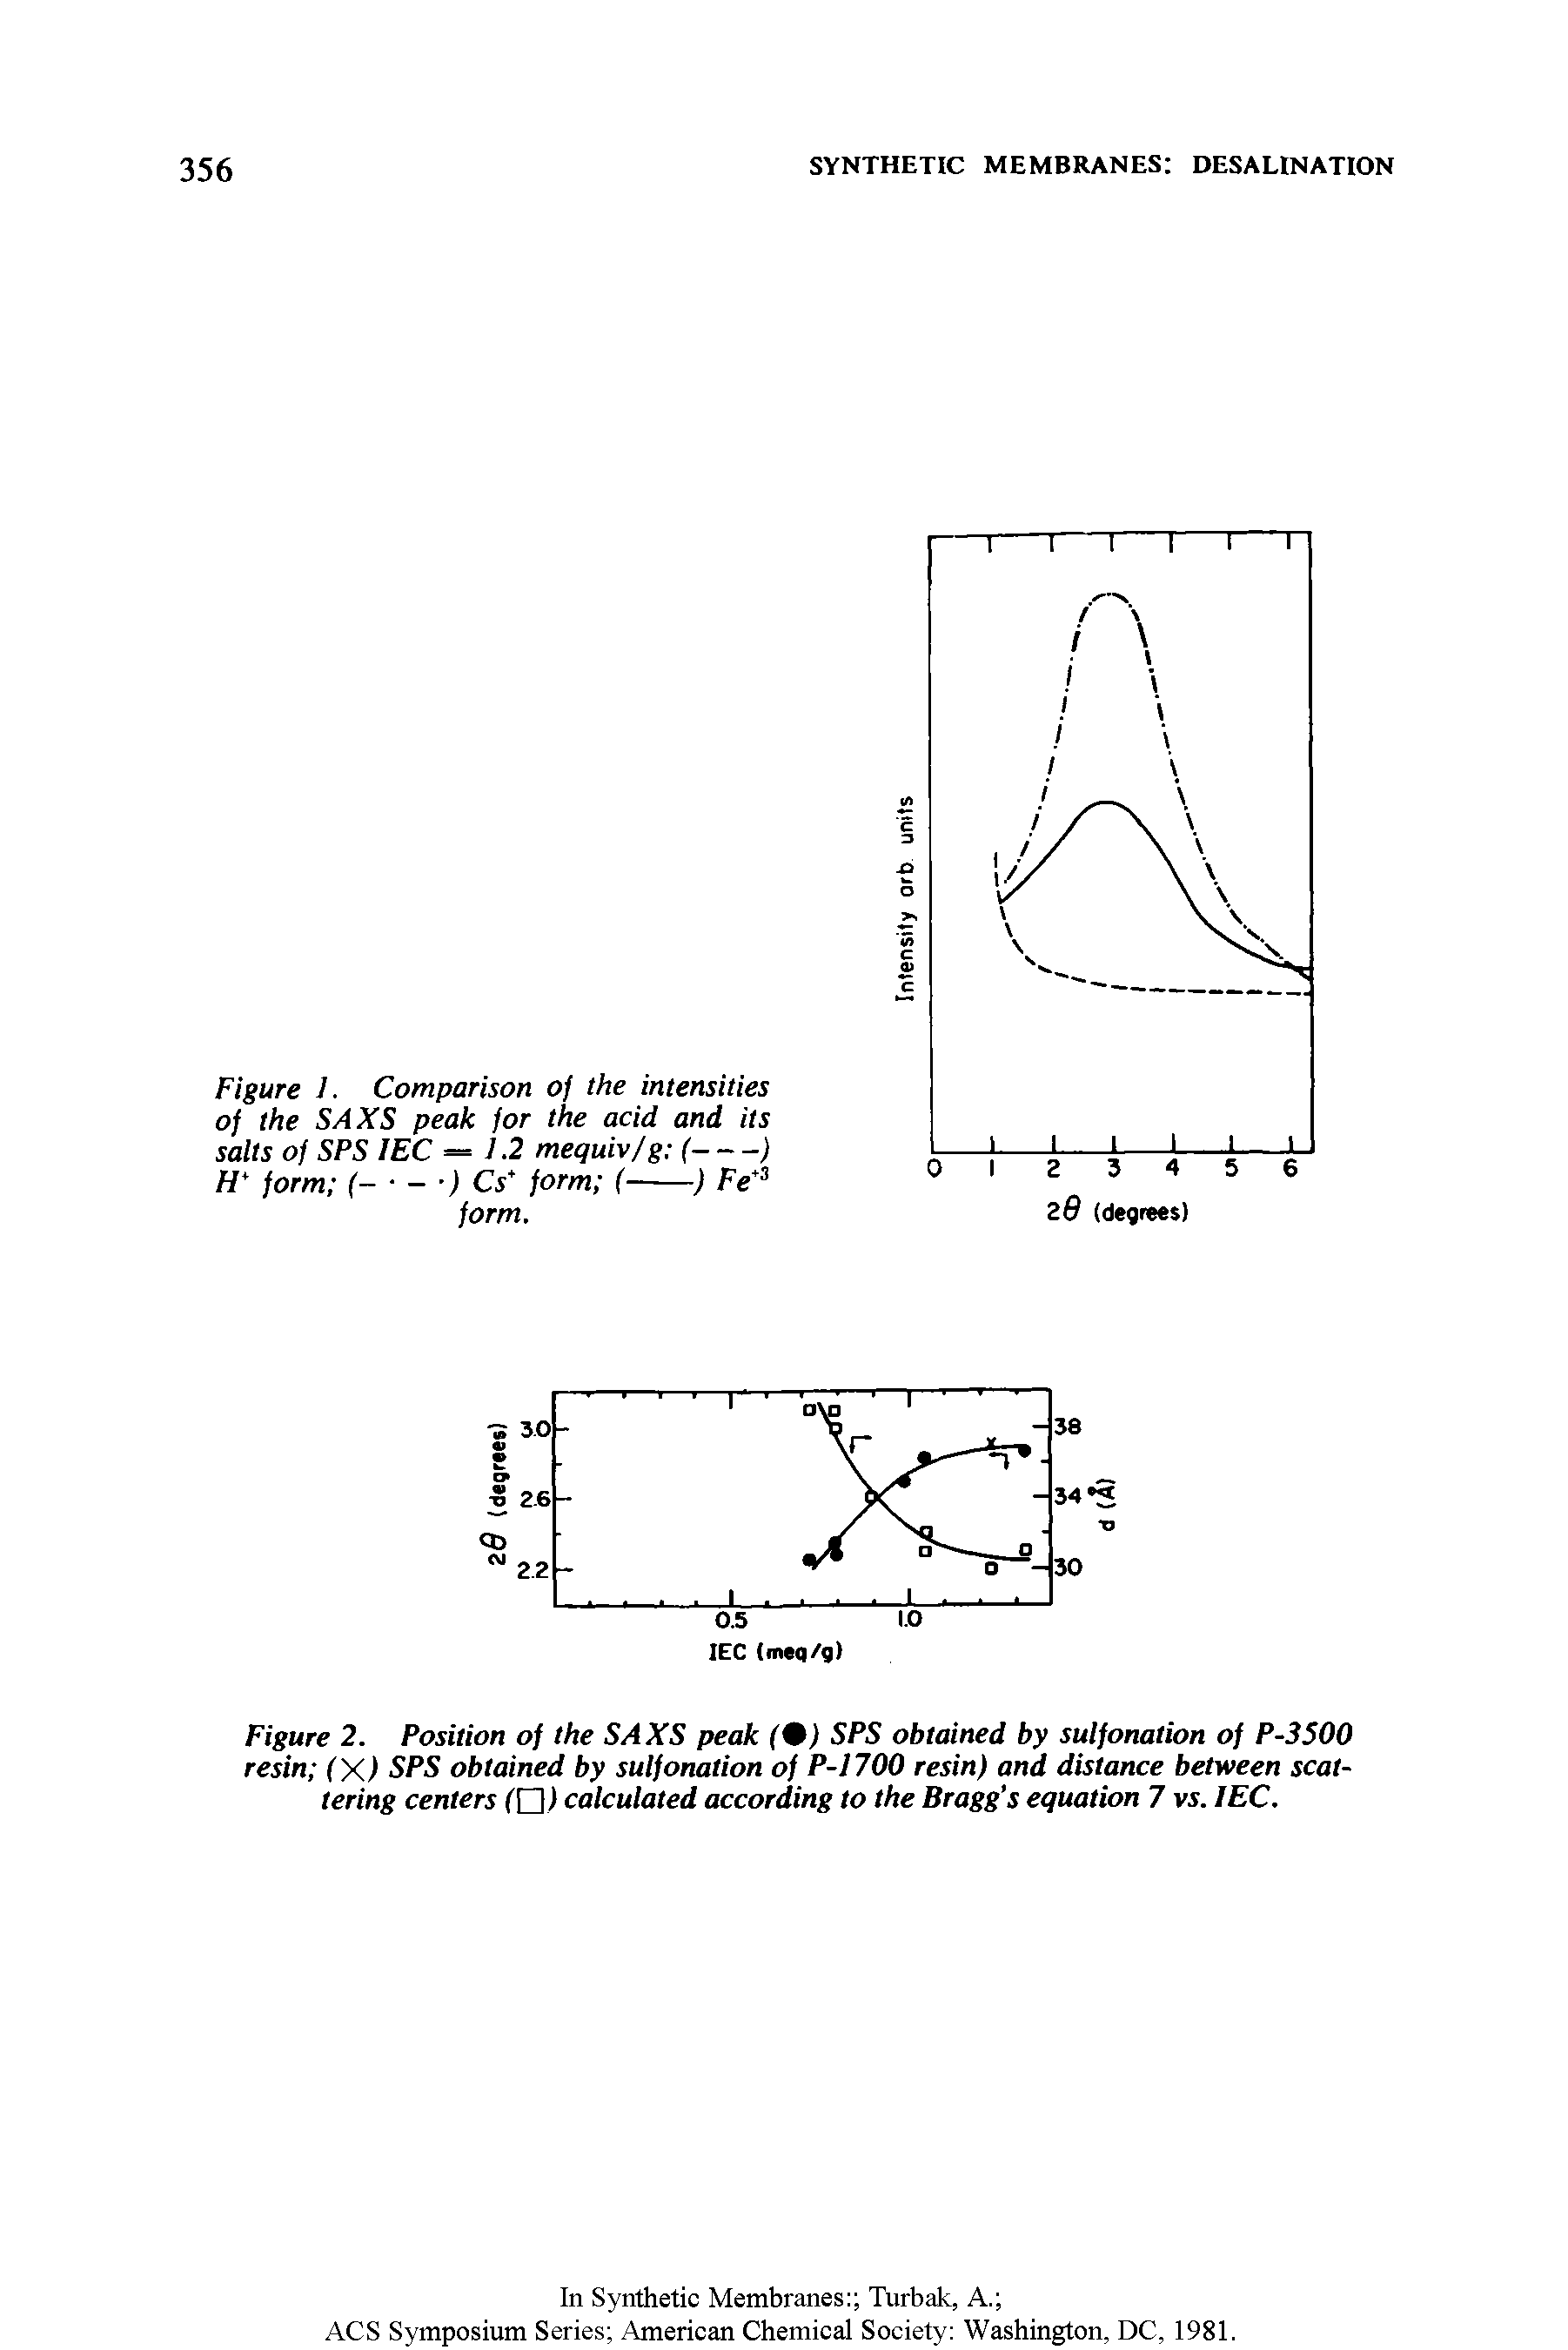 Figure 2. Position of the SAXS peak (9) SPS obtained by suifonation of P-3500 resin (X) SPS obtained by suifonation of P-1700 resin) and distance between scattering centers fD) calculated according to the Bragg s equation 7 vi. lEC.